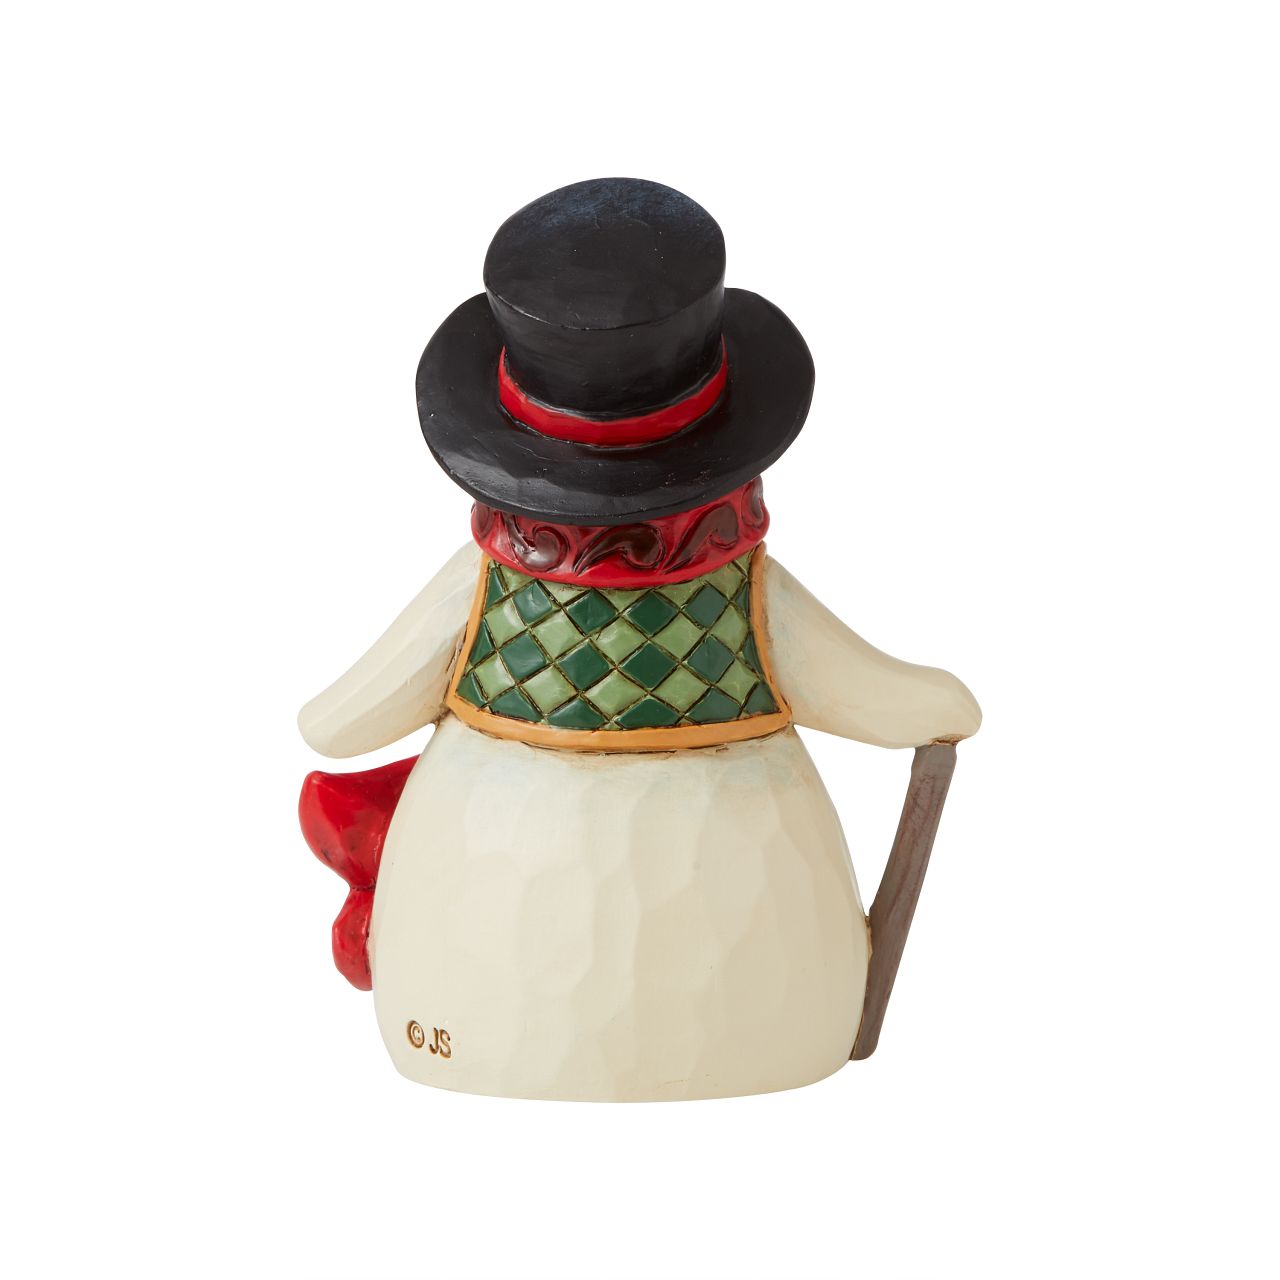 Jim Shore Heartwood Creek Snowman with Long Scarf Mini Figurine  This mini Snowman is the ideal addition to any Heartwood Creek collection. Hand-painted with intricate details, styled in the iconic Jim Shore style, each piece comes in a Kraft box witha product image on the side, for easy storage, display and gifting.